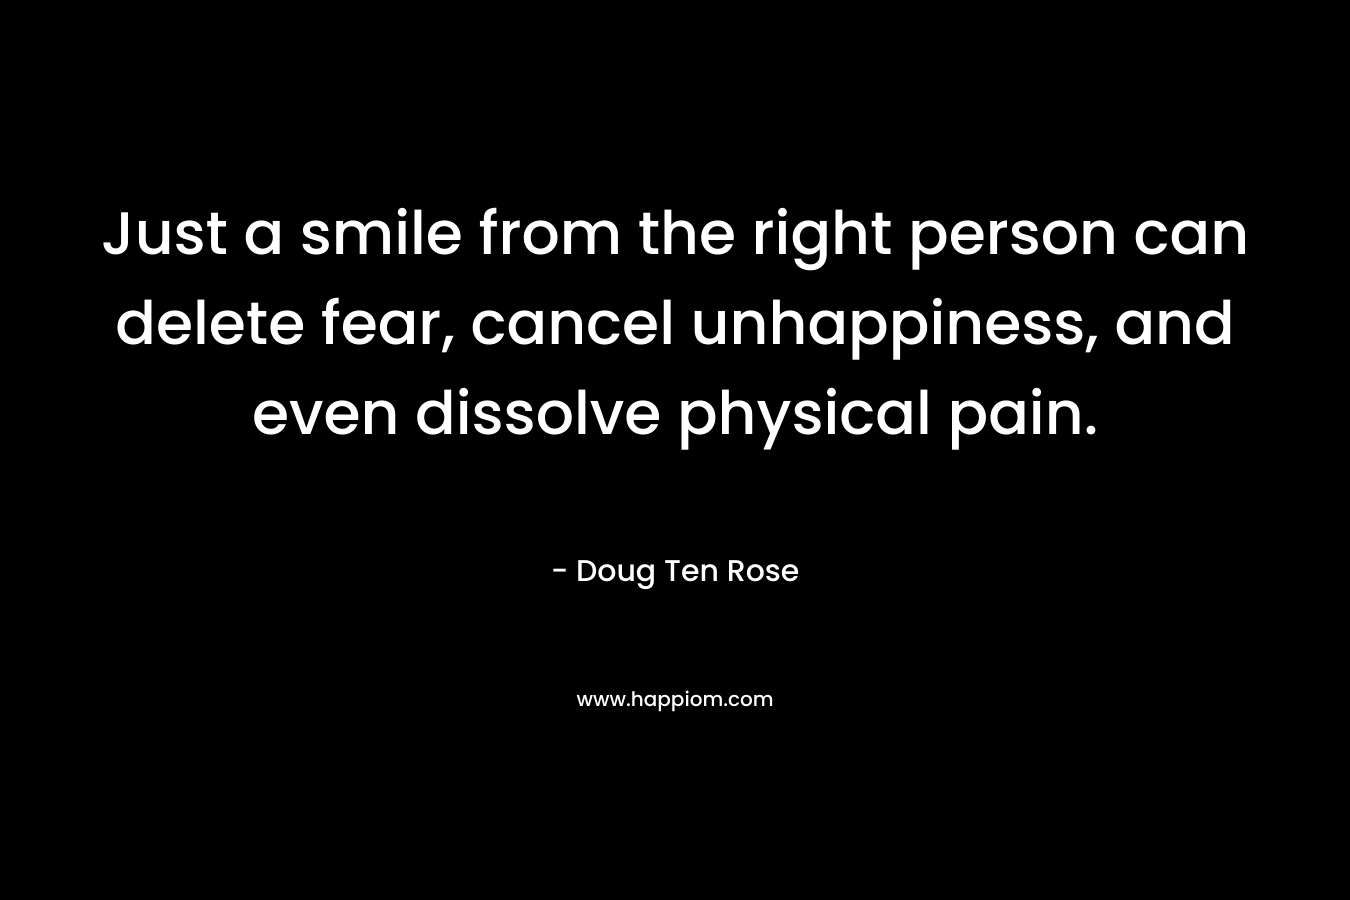 Just a smile from the right person can delete fear, cancel unhappiness, and even dissolve physical pain. – Doug Ten Rose